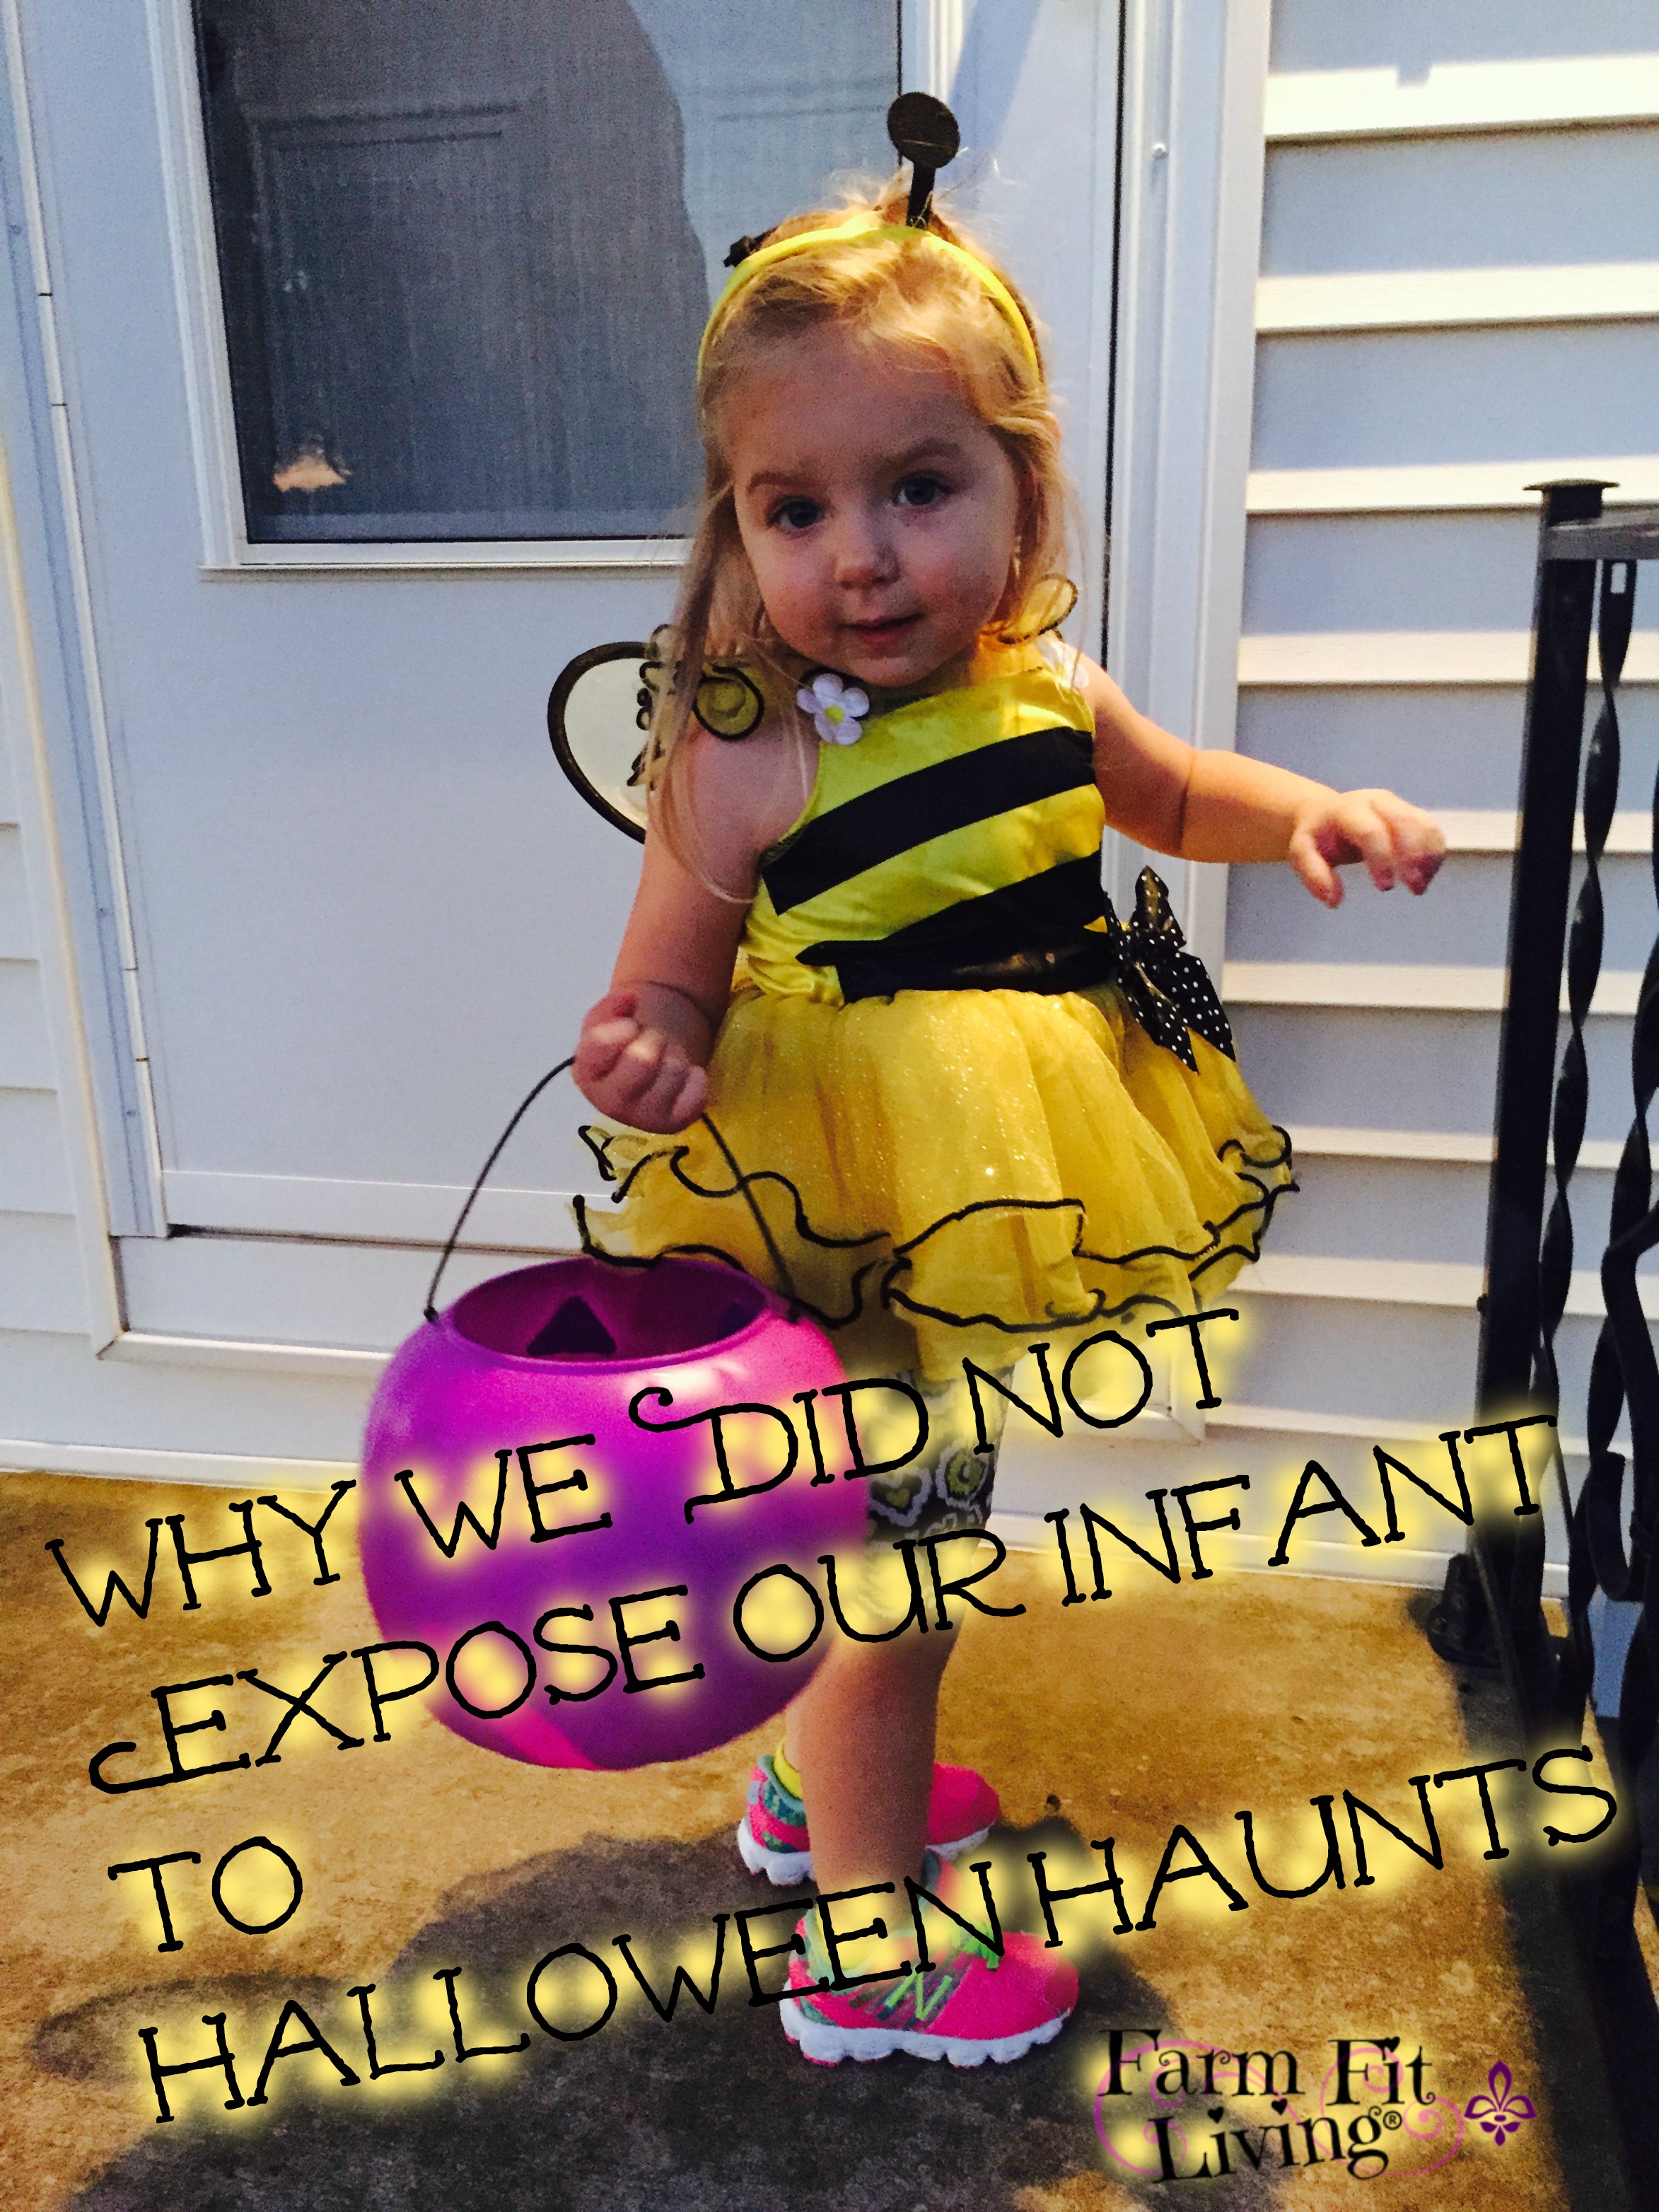 Why We Did Not Expose Our Infant to Halloween Haunts